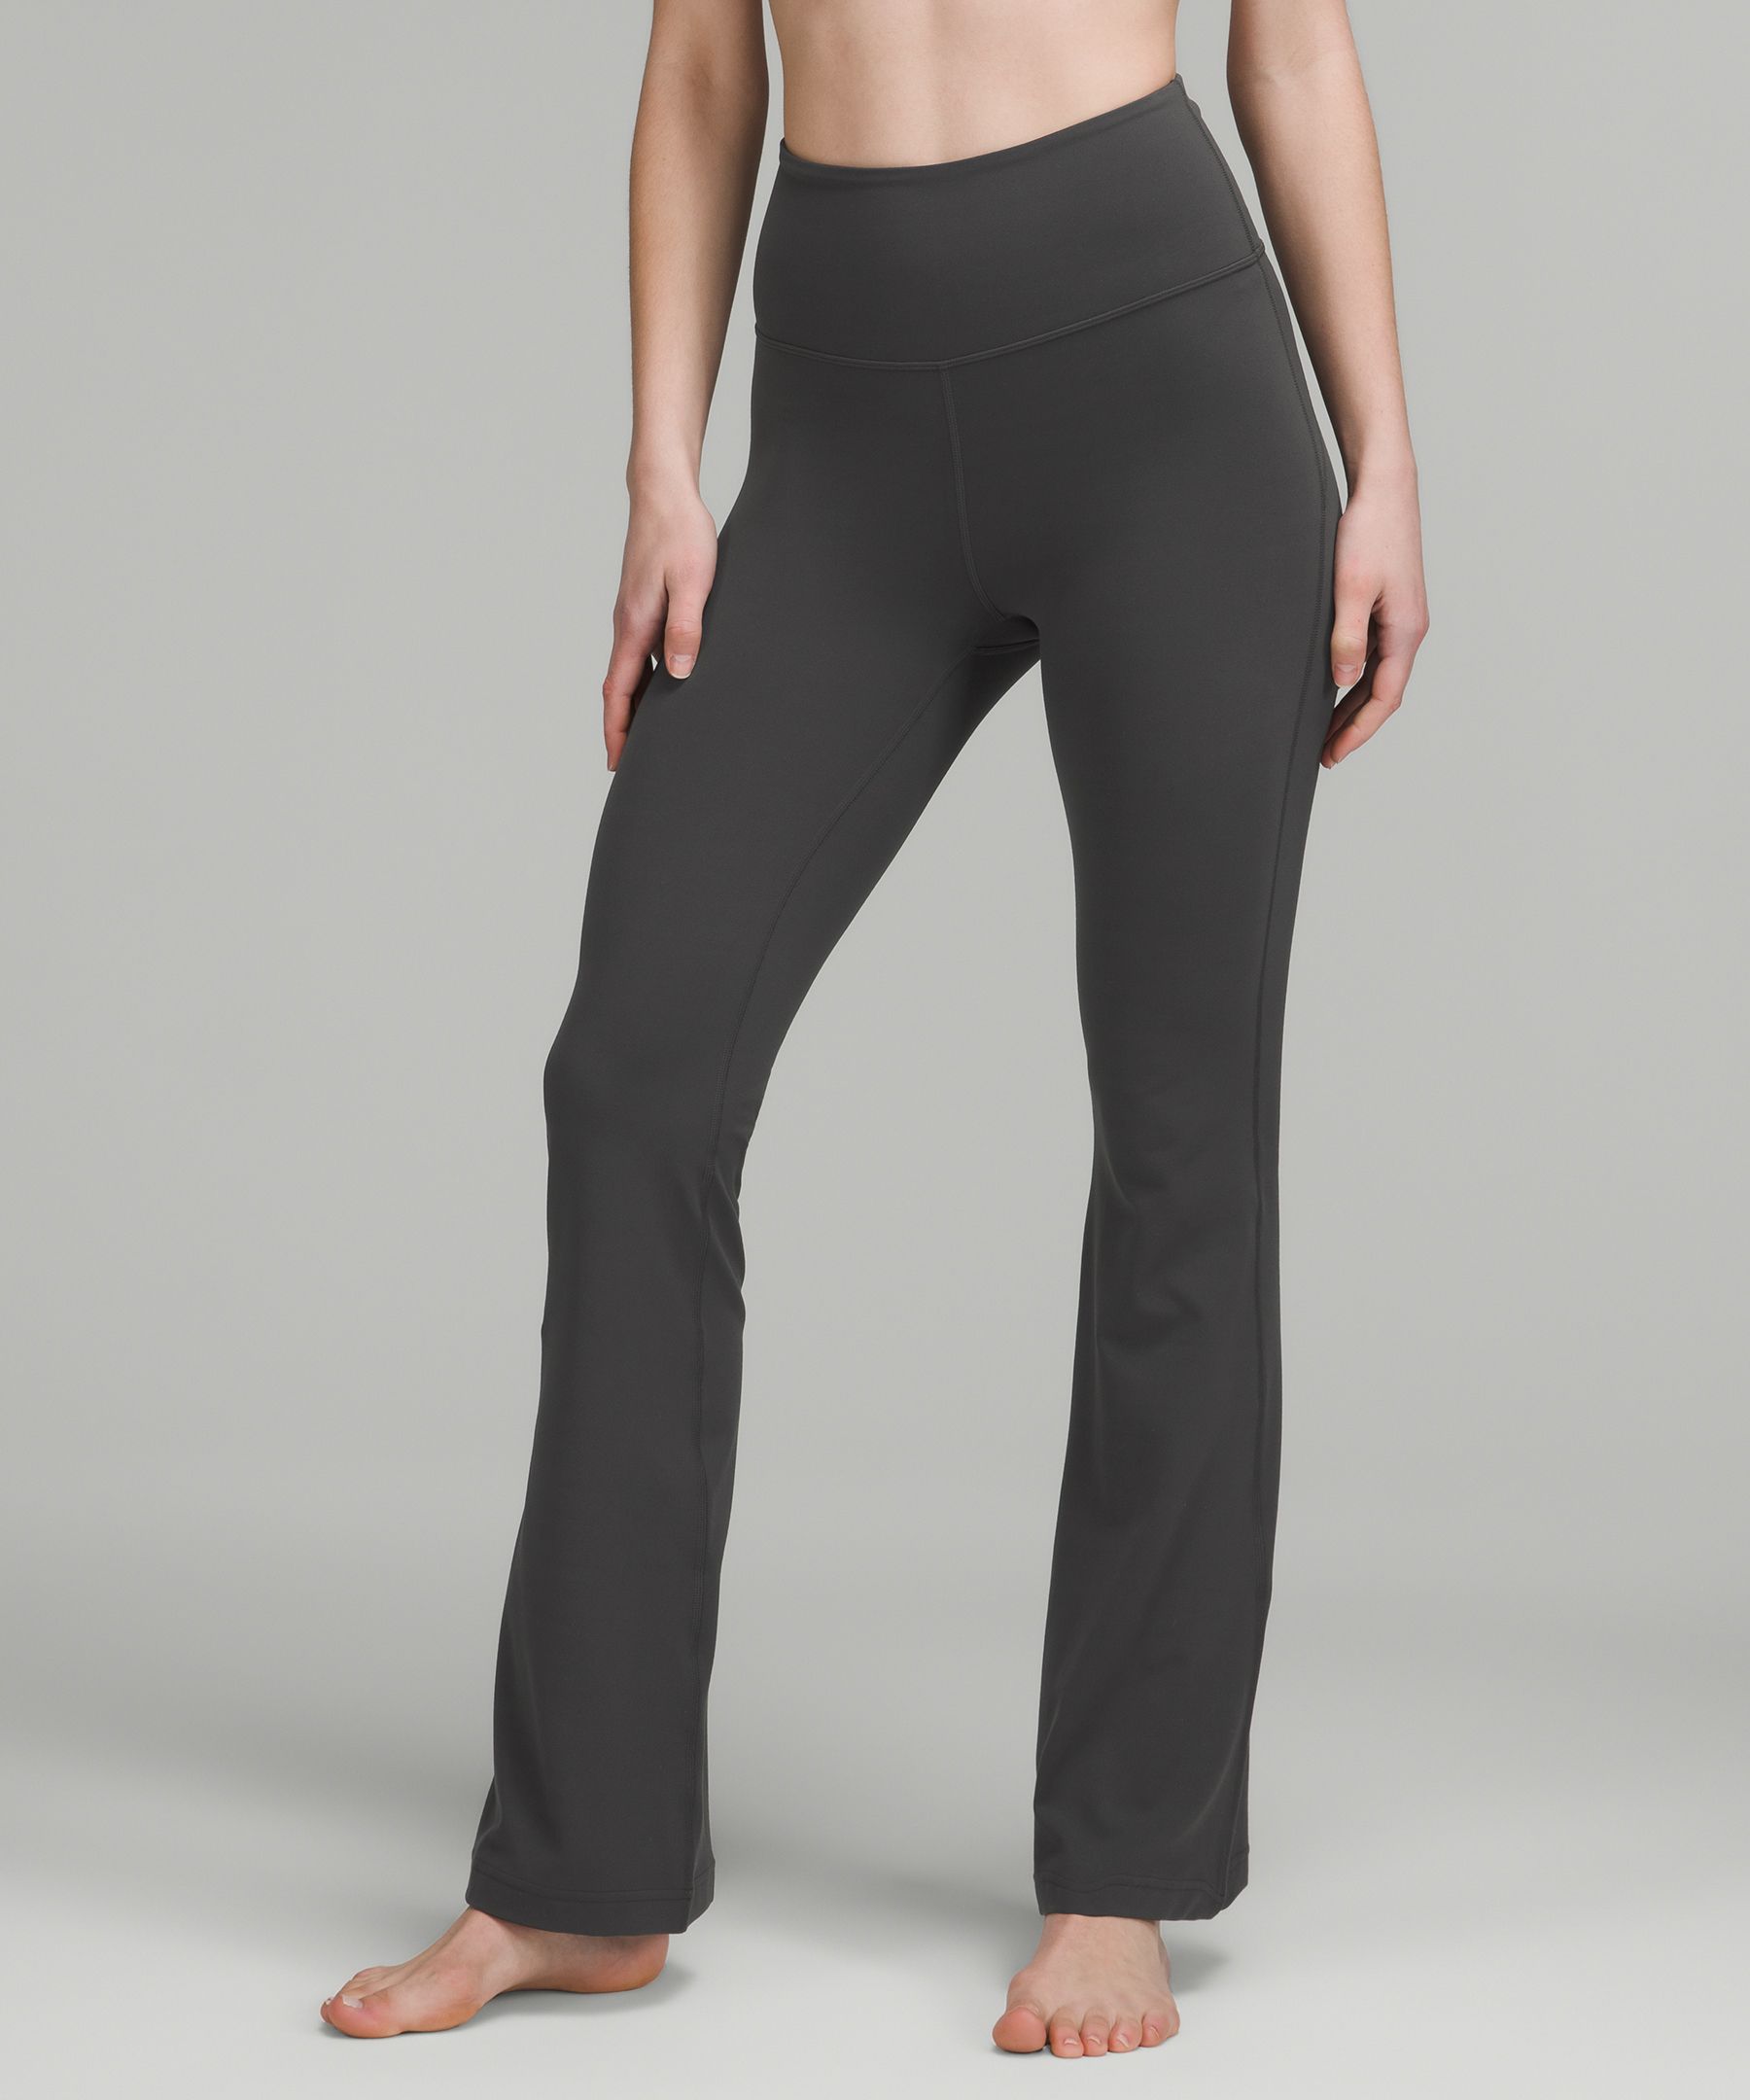 Groove Pant Flare Super High-Rise *Nulu  Flare pants, Pants for women,  Lululemon groove pant